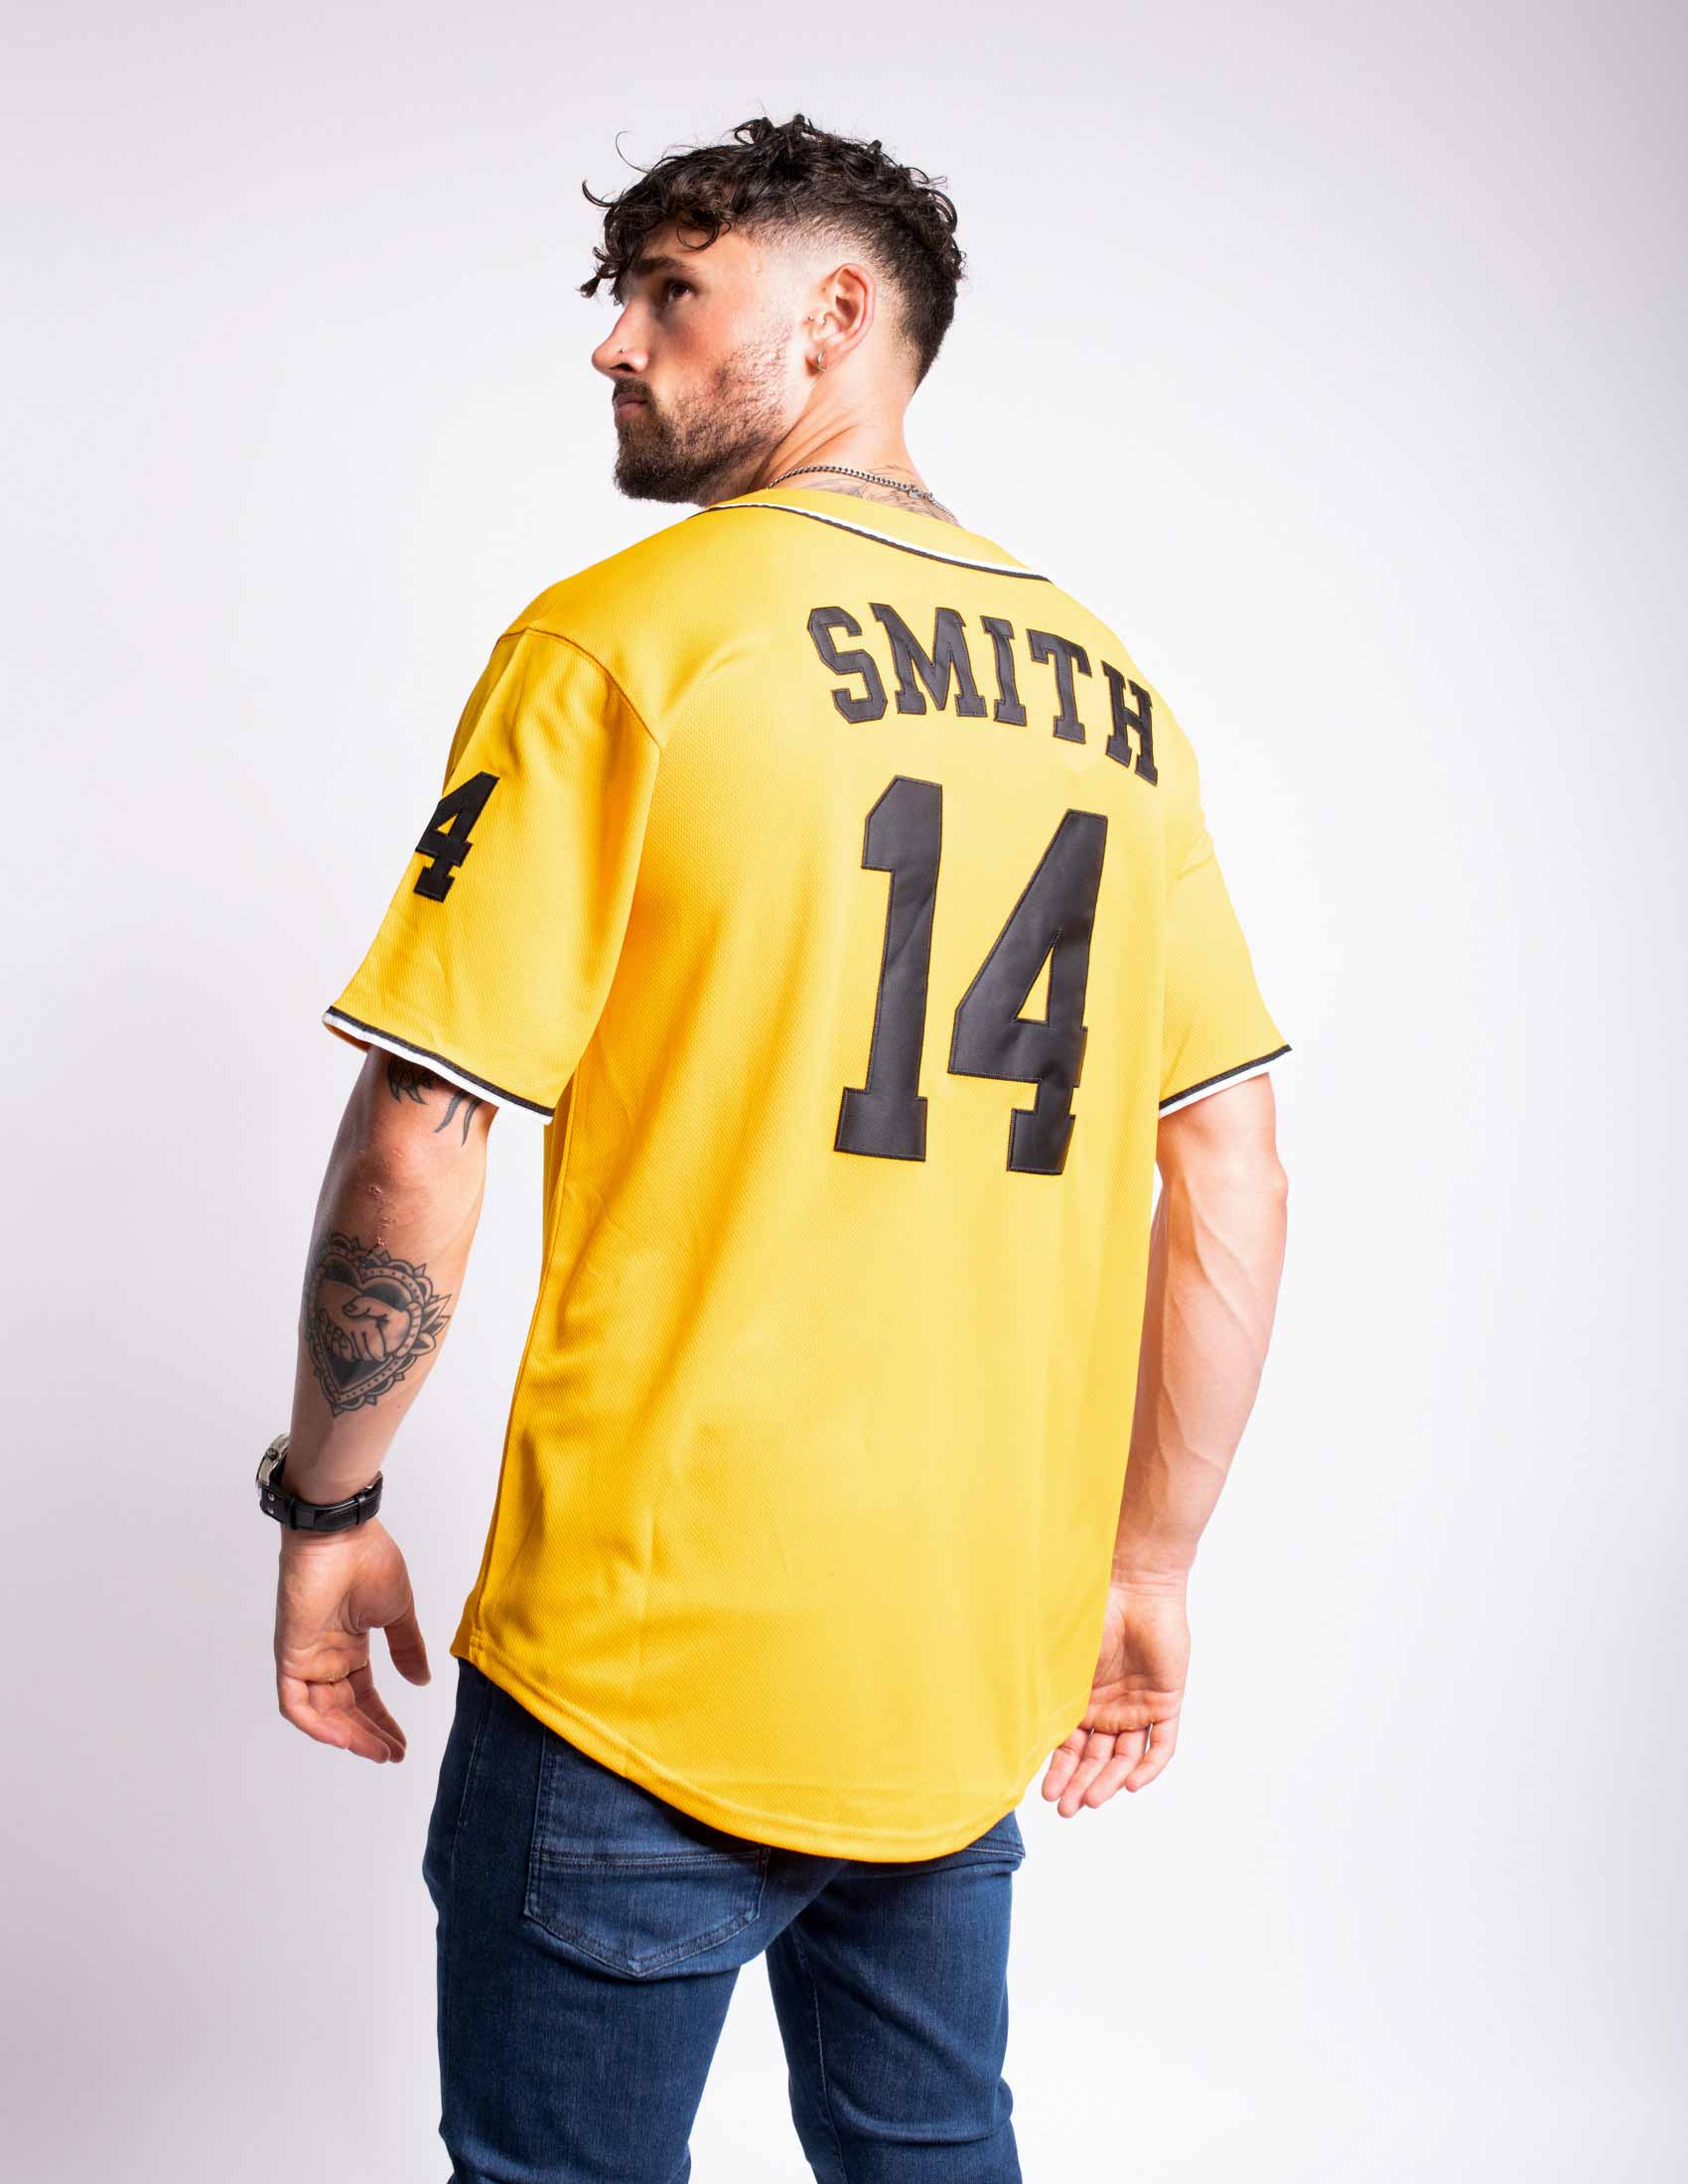 Unlimited Classics Will Smith #14 Bel-Air Academy Baseball Jersey XL